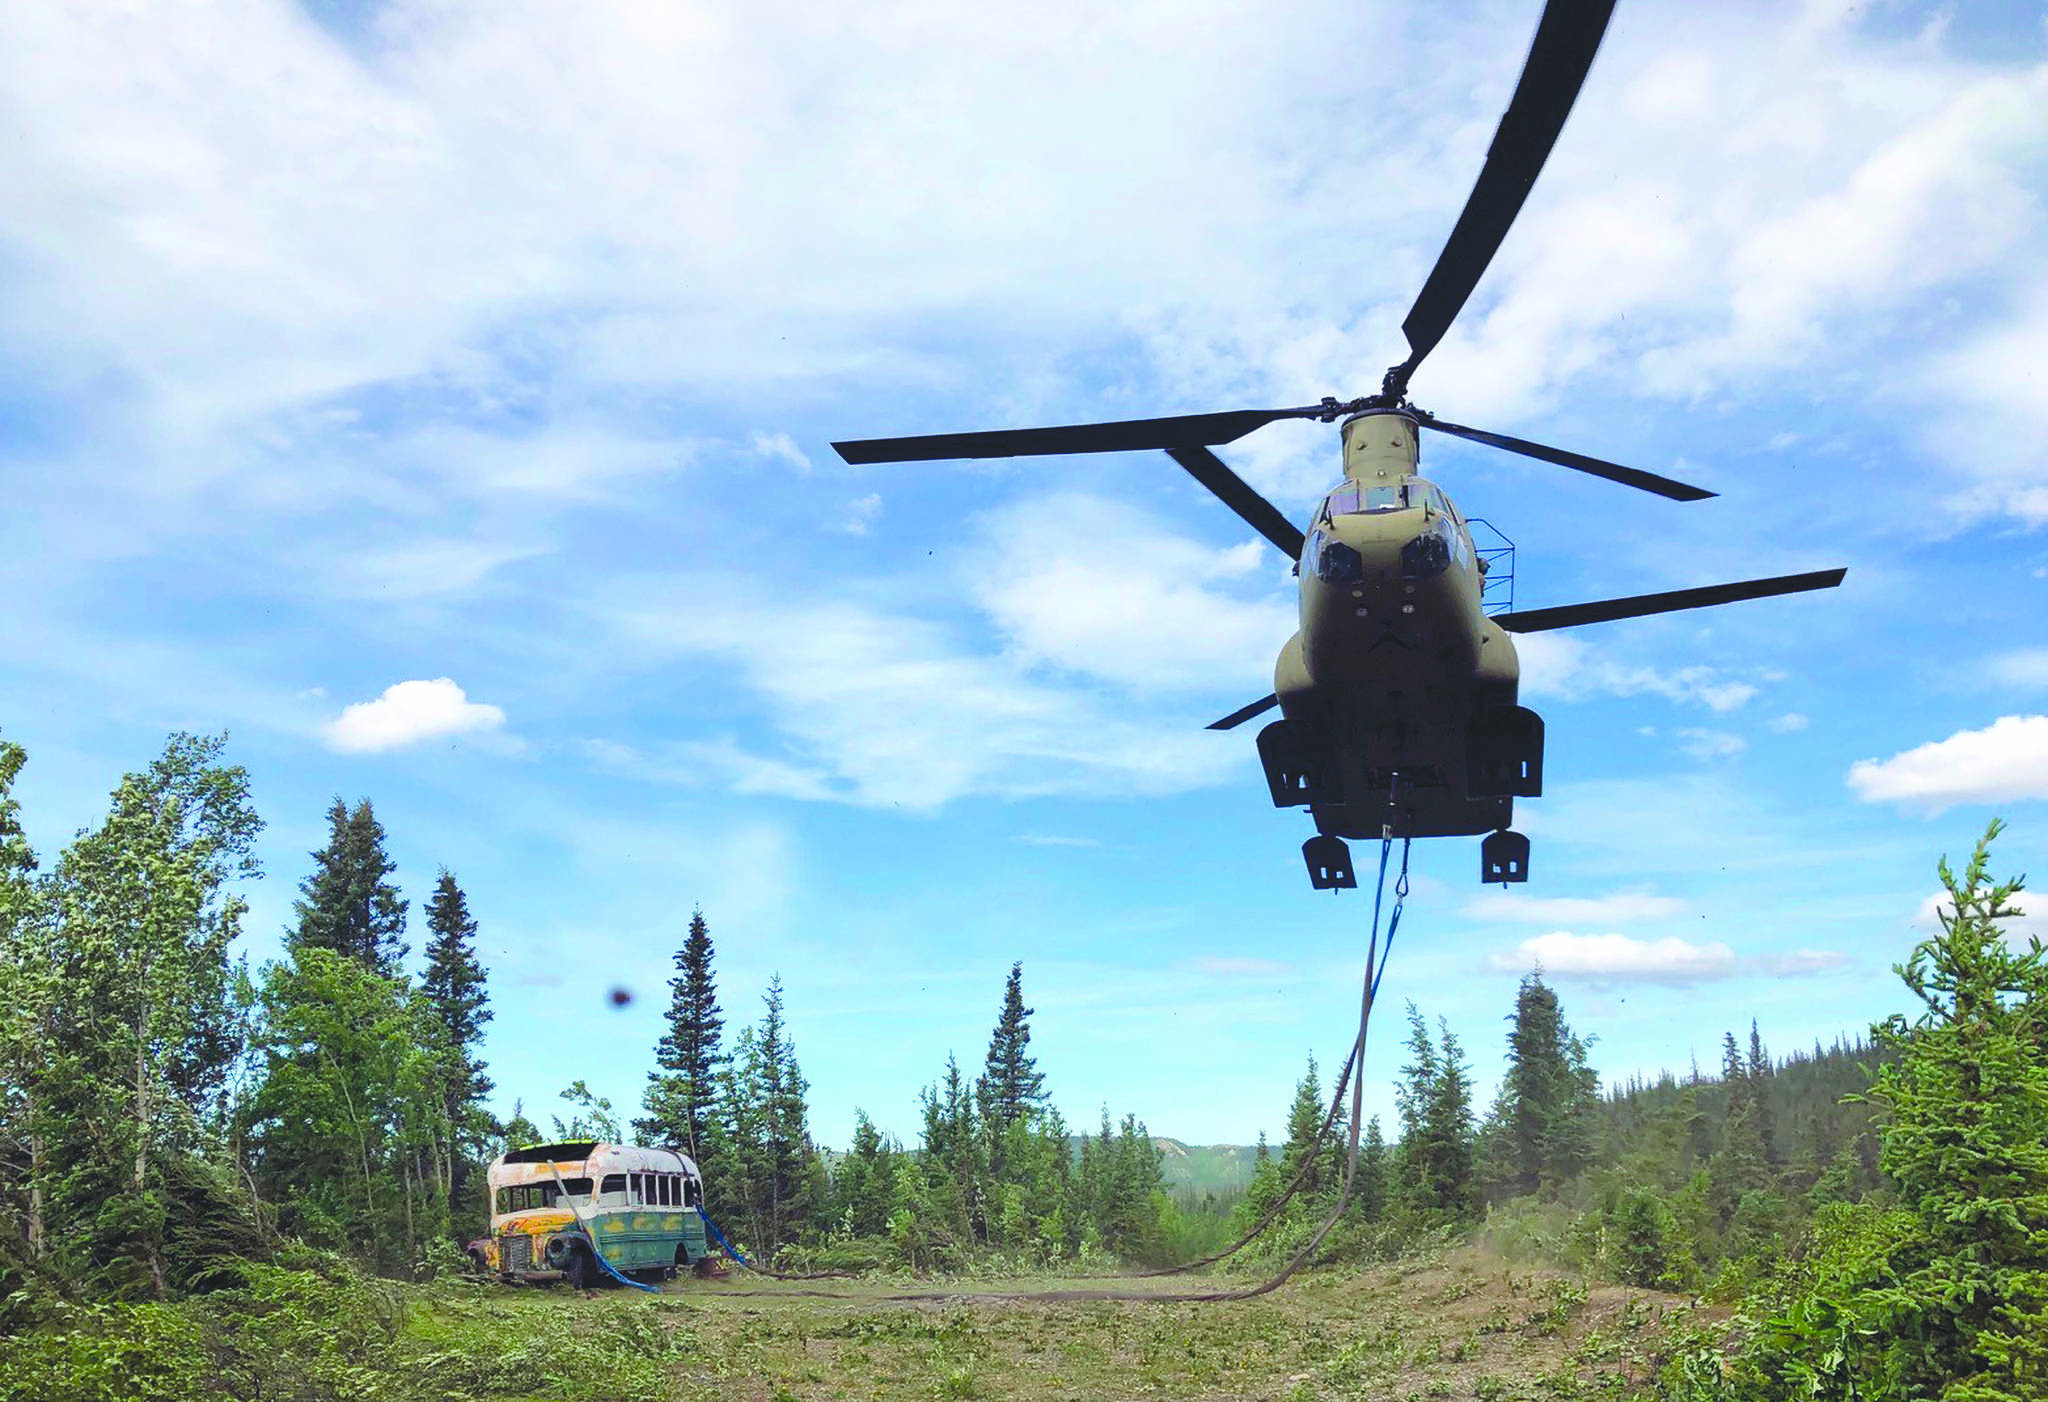 In this photo released by the Alaska National Guard, Alaska Army National Guard soldiers use a CH-47 Chinook helicopter to removed an abandoned bus, popularized by the book and movie “Into the Wild,” out of its location in the Alaska backcountry Thursday, June 18, 2020, as part of a training mission. Alaska Natural Resources Commissioner Corri Feige, in a release, said the bus will be kept in a secure location while her department weighs various options for what to do with it. (Sgt. Seth LaCount/Alaska National Guard via AP)